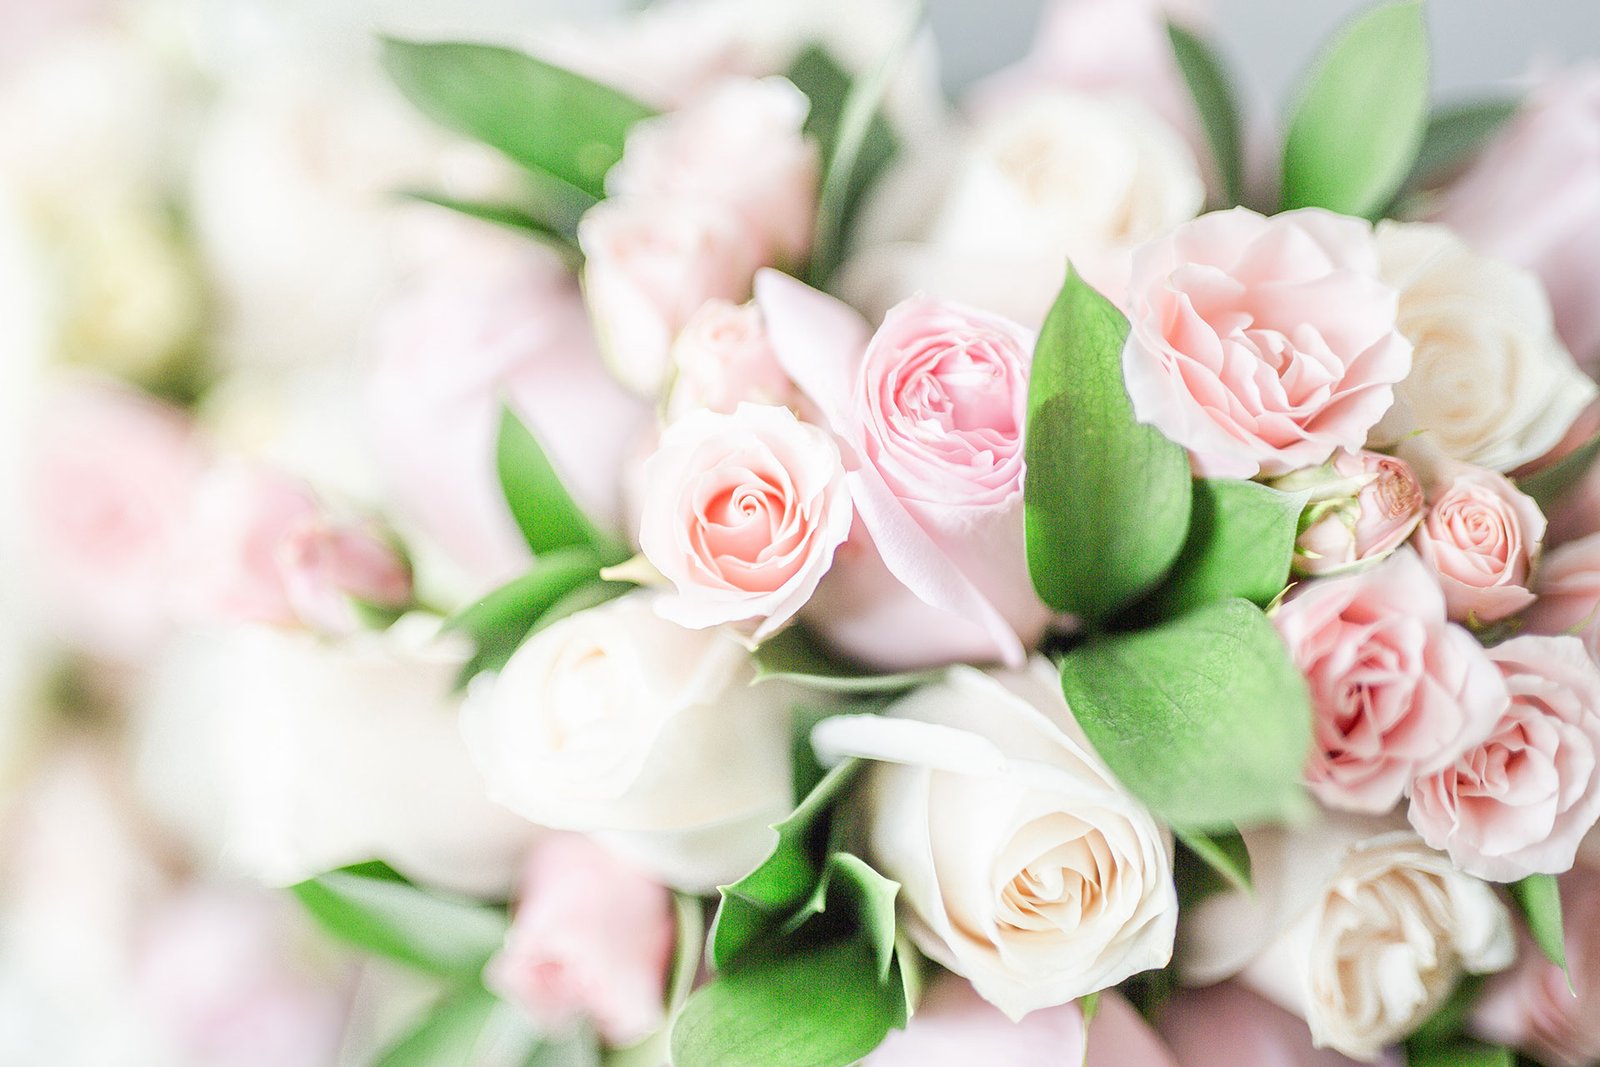 8 tips when picking your wedding flowers - 8 Tips When Picking Your Wedding Flowers